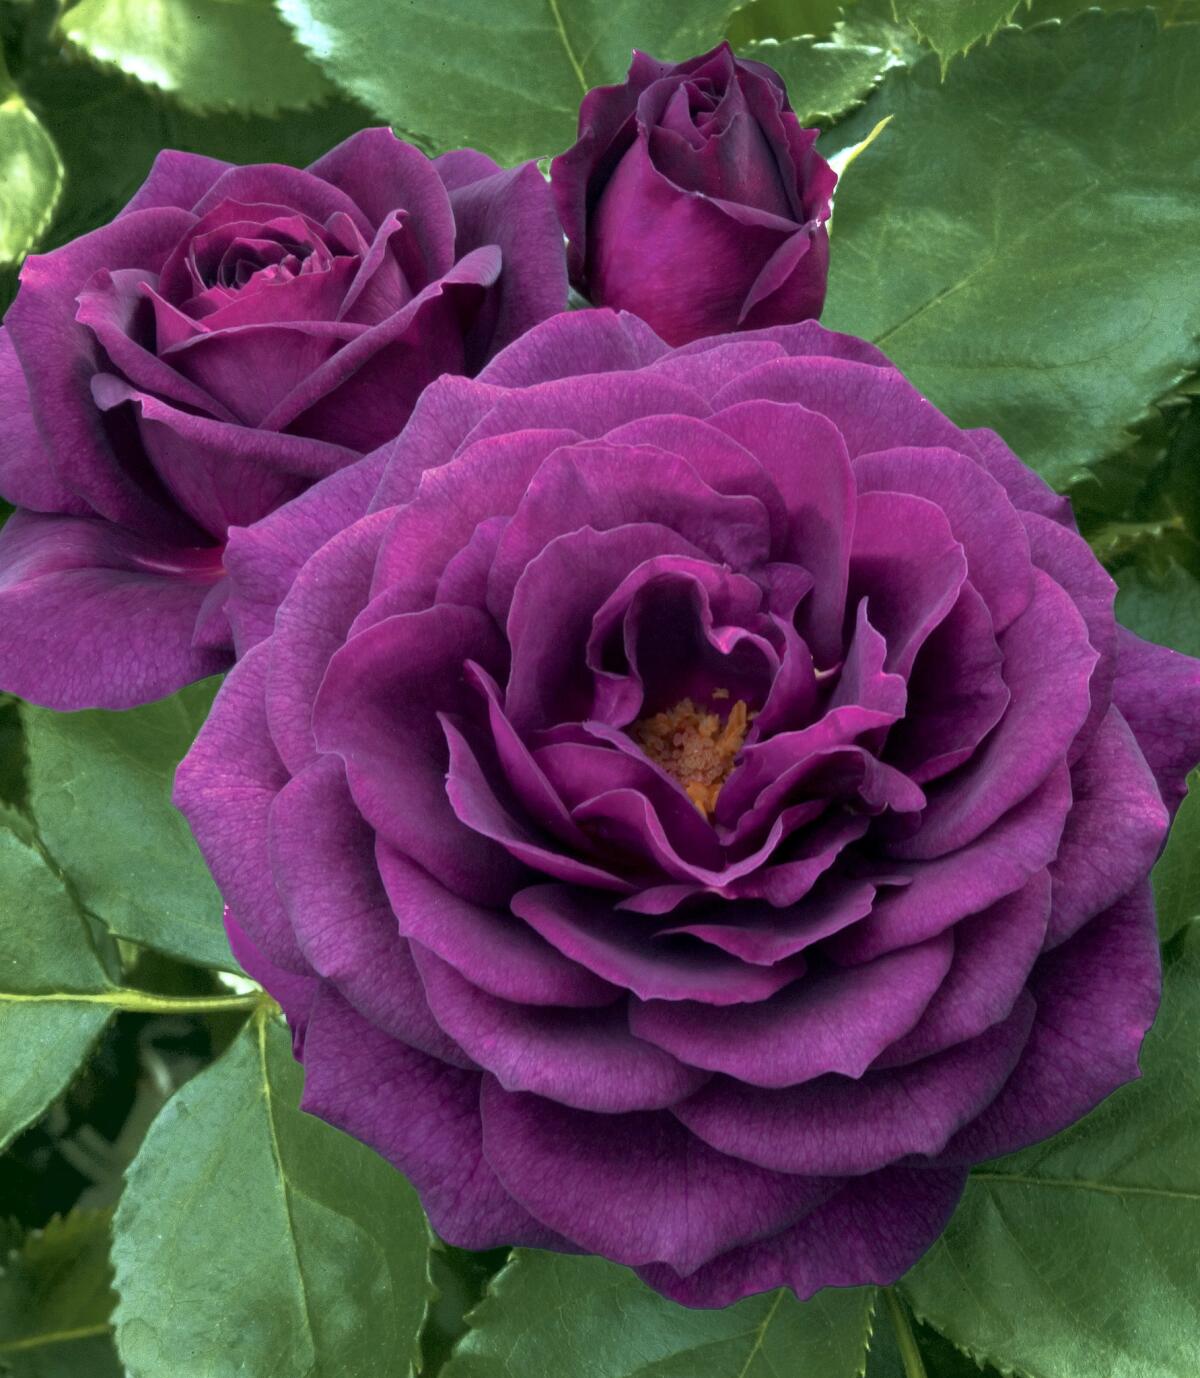 One of Tom Carruth’s earliest successes as a breeder was the creation of “Ebb Tide,” the first truly purple rose. (Weeks Roses)